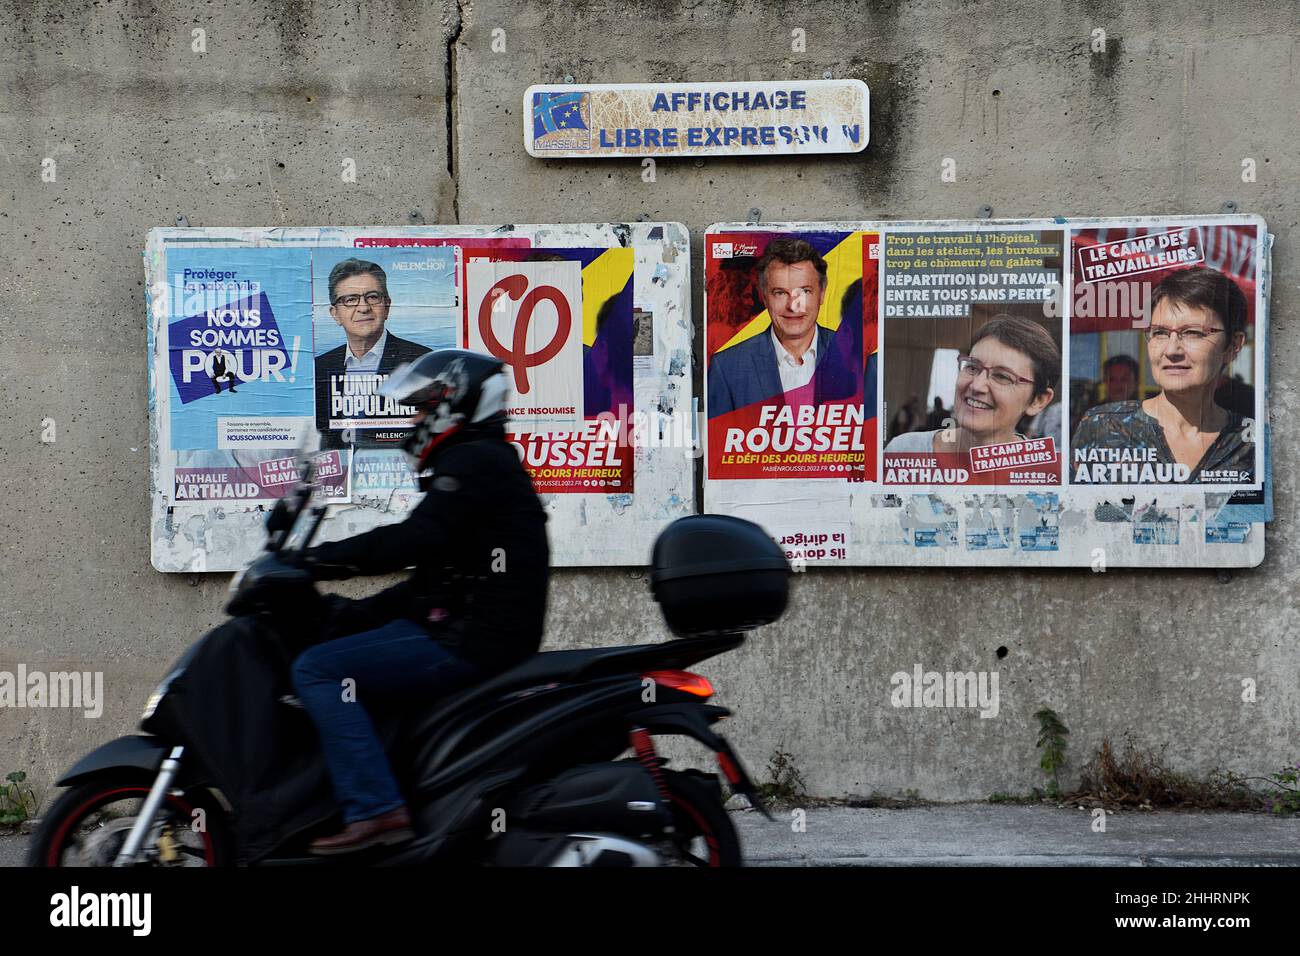 Marseille, France. 25th Jan, 2022. A man on a scooter rides past posters of Jean-Luc Mélenchon (L), Fabien Roussel (C) and Nathalie Arthaud (R) on display.Posters campaign of Nathalie Arthaud, Fabien Roussel, Philippe Poutou and Jean-Luc Mélenchon, candidates for the French presidential elections of 2022. Credit: SOPA Images Limited/Alamy Live News Stock Photo